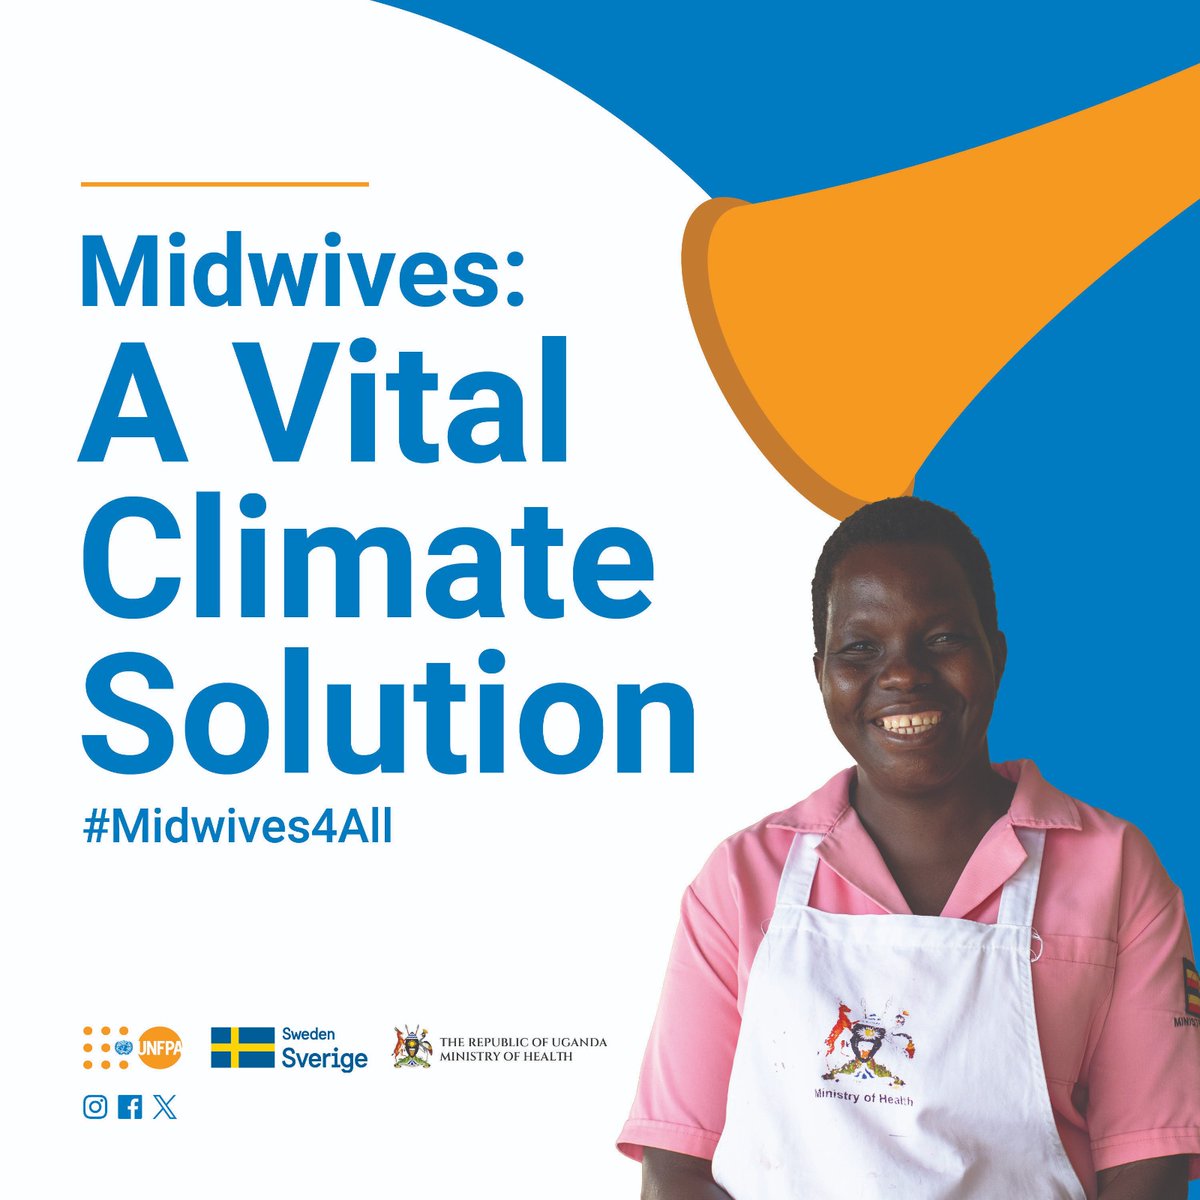 Celebrating International Midwives Day! With only 1.9 million midwives globally, @UNFPAUganda @nmau and partners are working towards bridging the gap to meet the growing need. Happy International Day of the Midwife! #Midwives4All #IDM2024